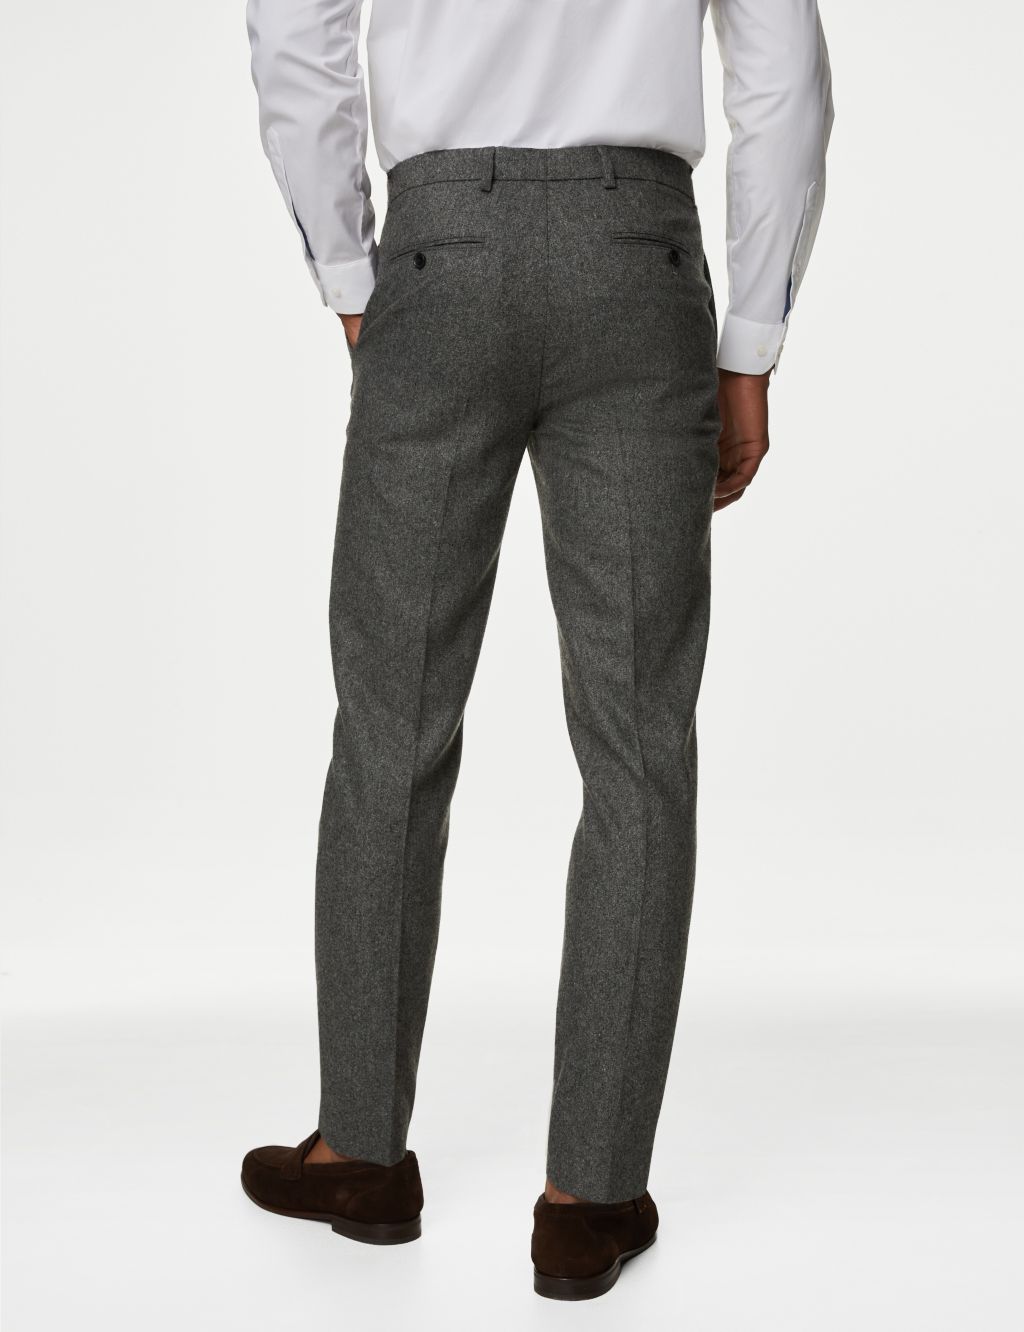 Tailored Fit Italian Wool Rich Suit Trousers image 5